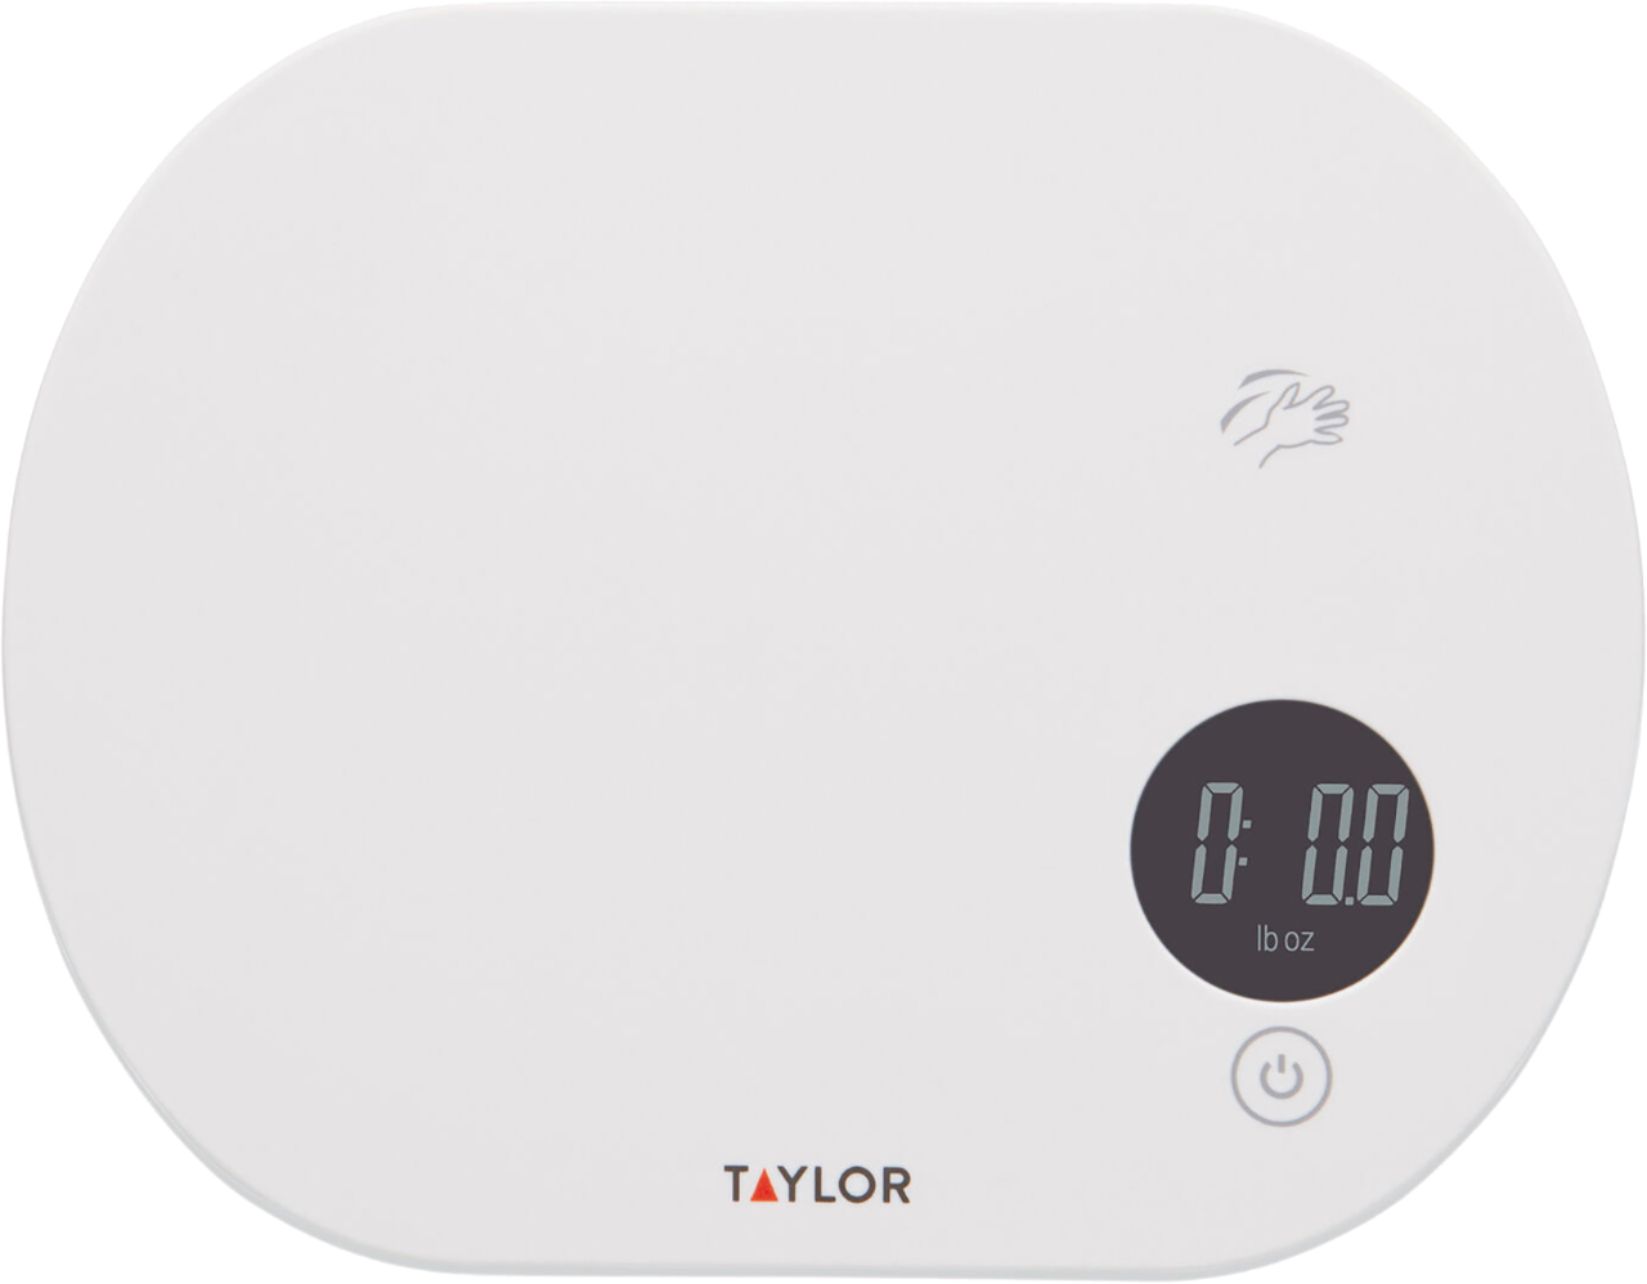 Angle View: Taylor - Touchless Tare Digital Kitchen Scale - White